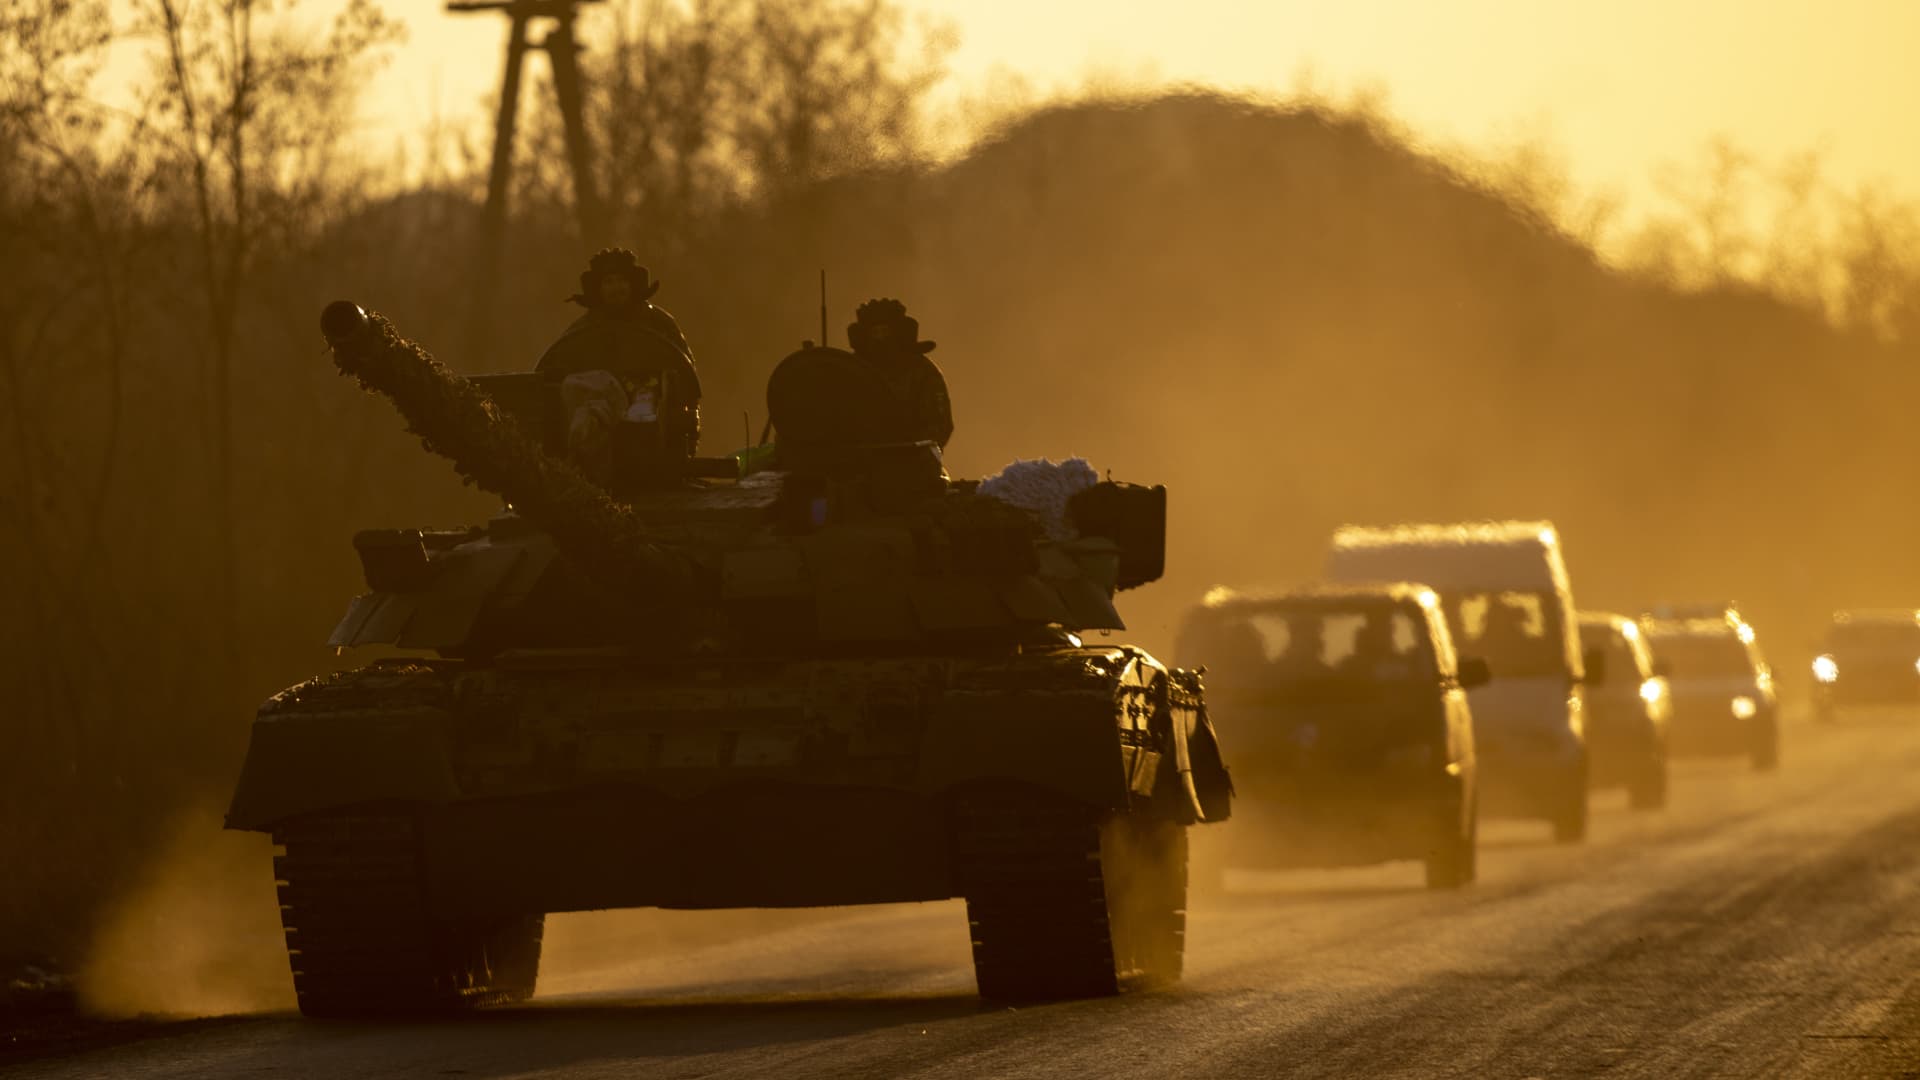 Ukrainian soldiers are seen on their ways to the frontlines with their armored military vehicles as the strikes continue on the Donbass frontline, during Russia and Ukraine war in Donetsk Oblast, Ukraine on January 26, 2023. 